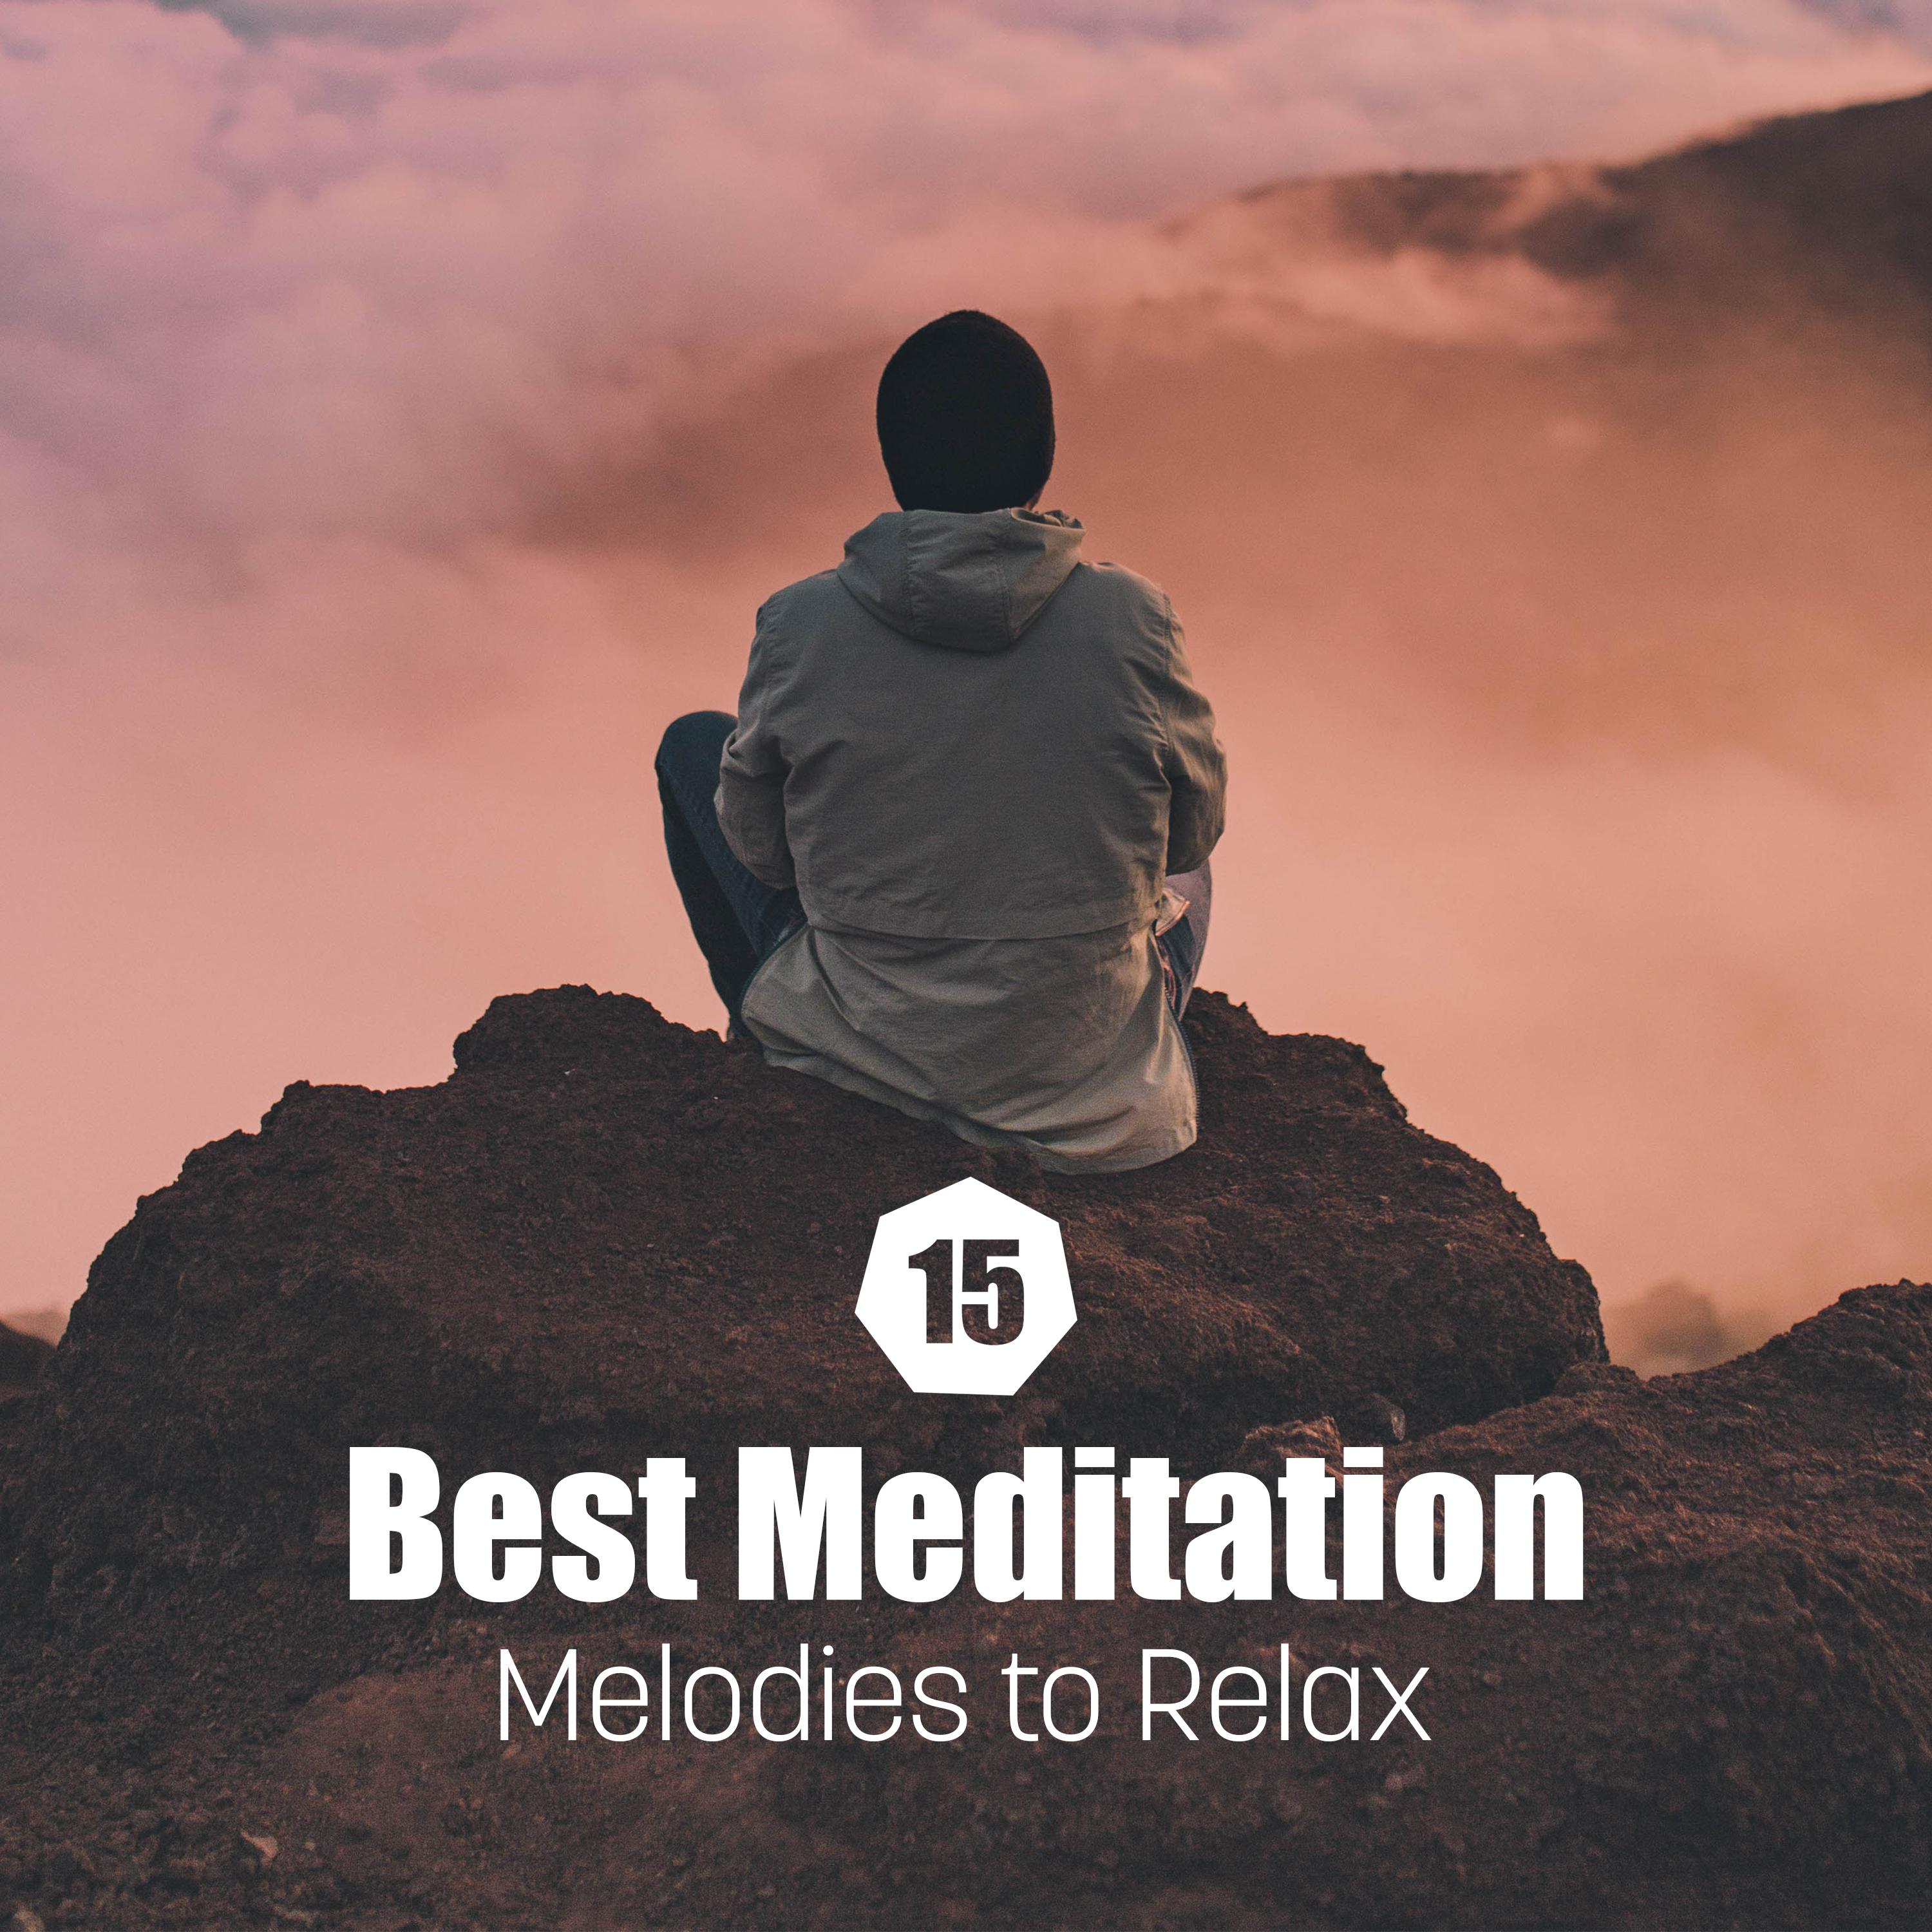 15 Best Meditation Melodies to Relax